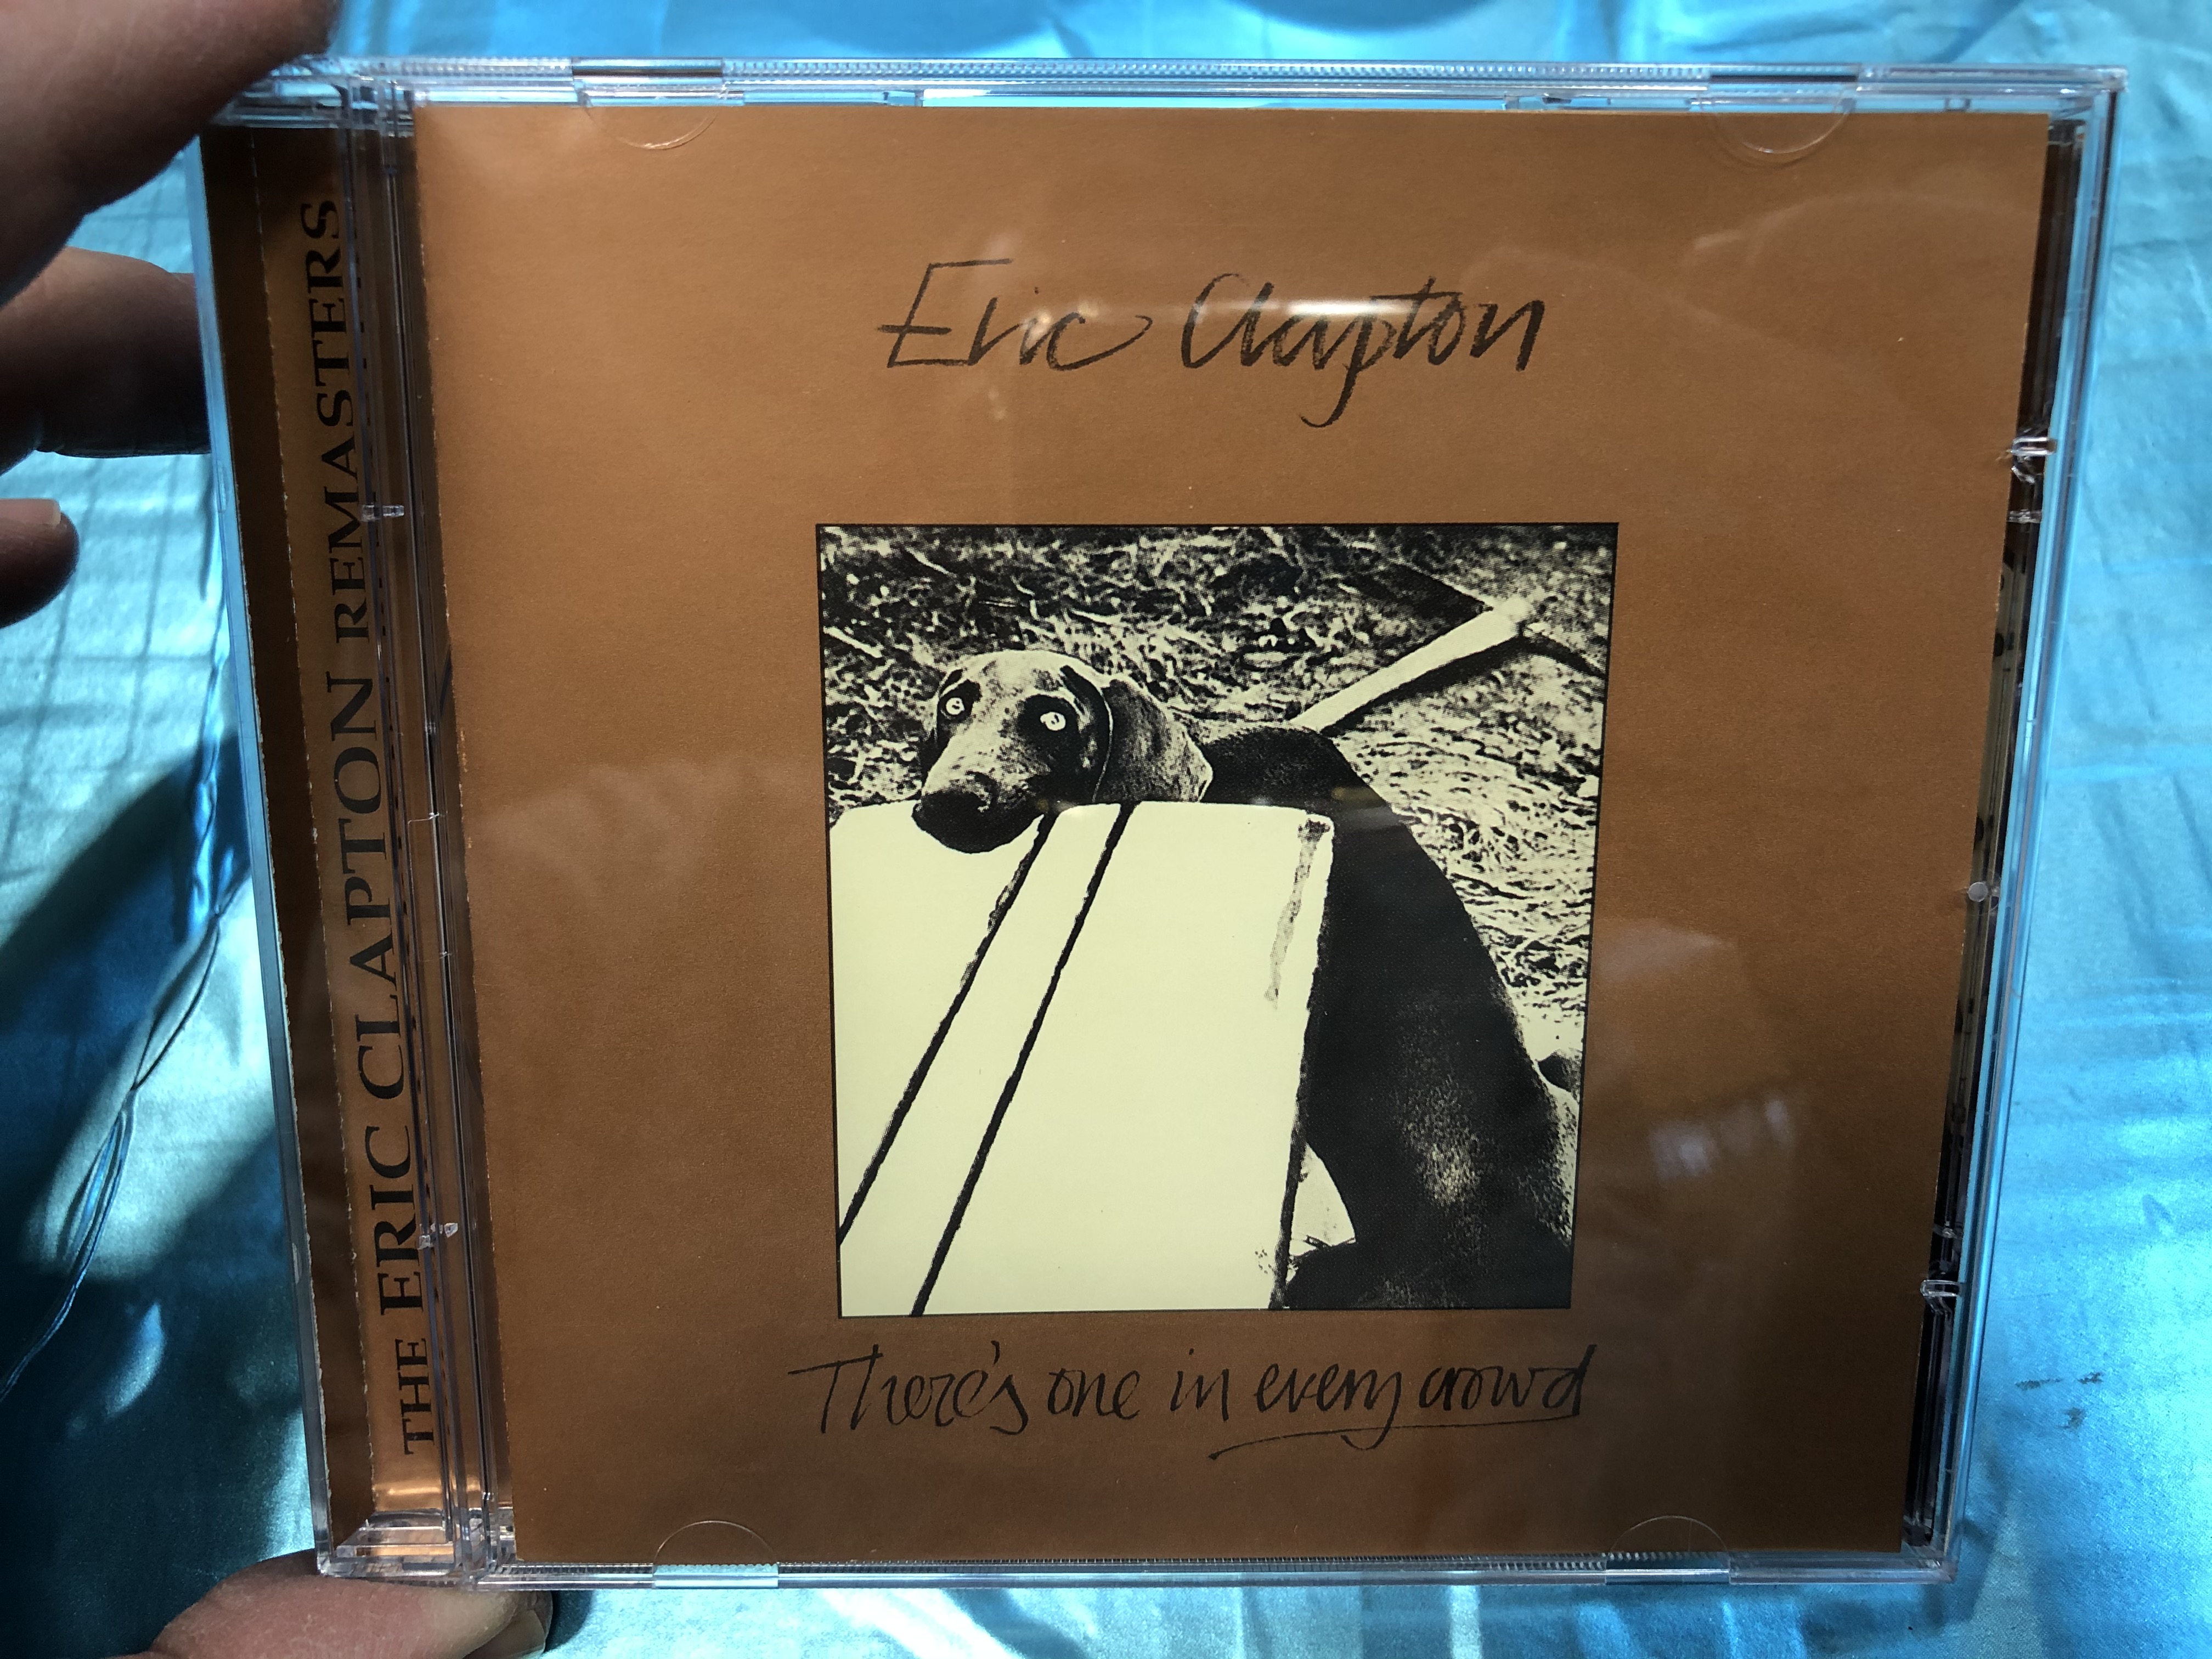 eric-clapton-there-s-one-in-every-crowd-polydor-audio-cd-1996-31453-1822-2-1-.jpg